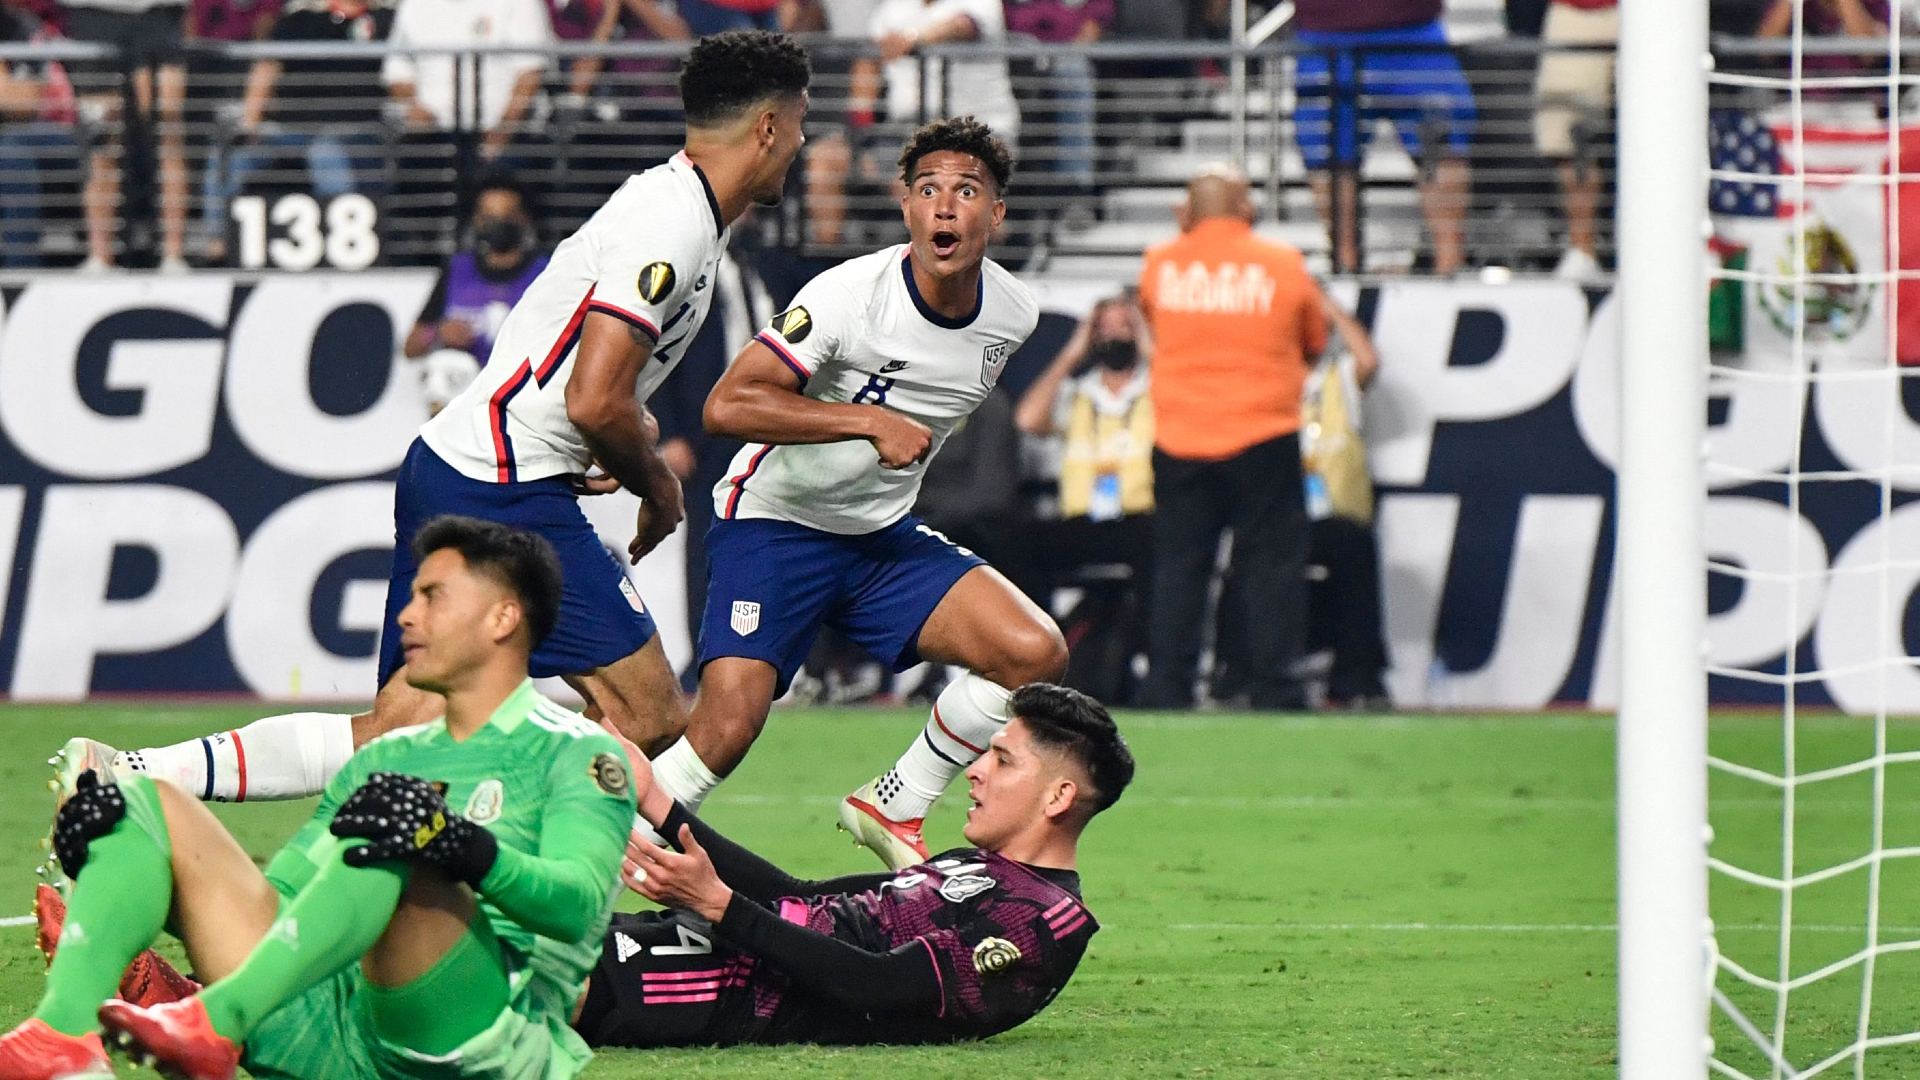 'Dos a Cero!' - USMNT shocks Mexico in extra time once again to seal second trophy of summer